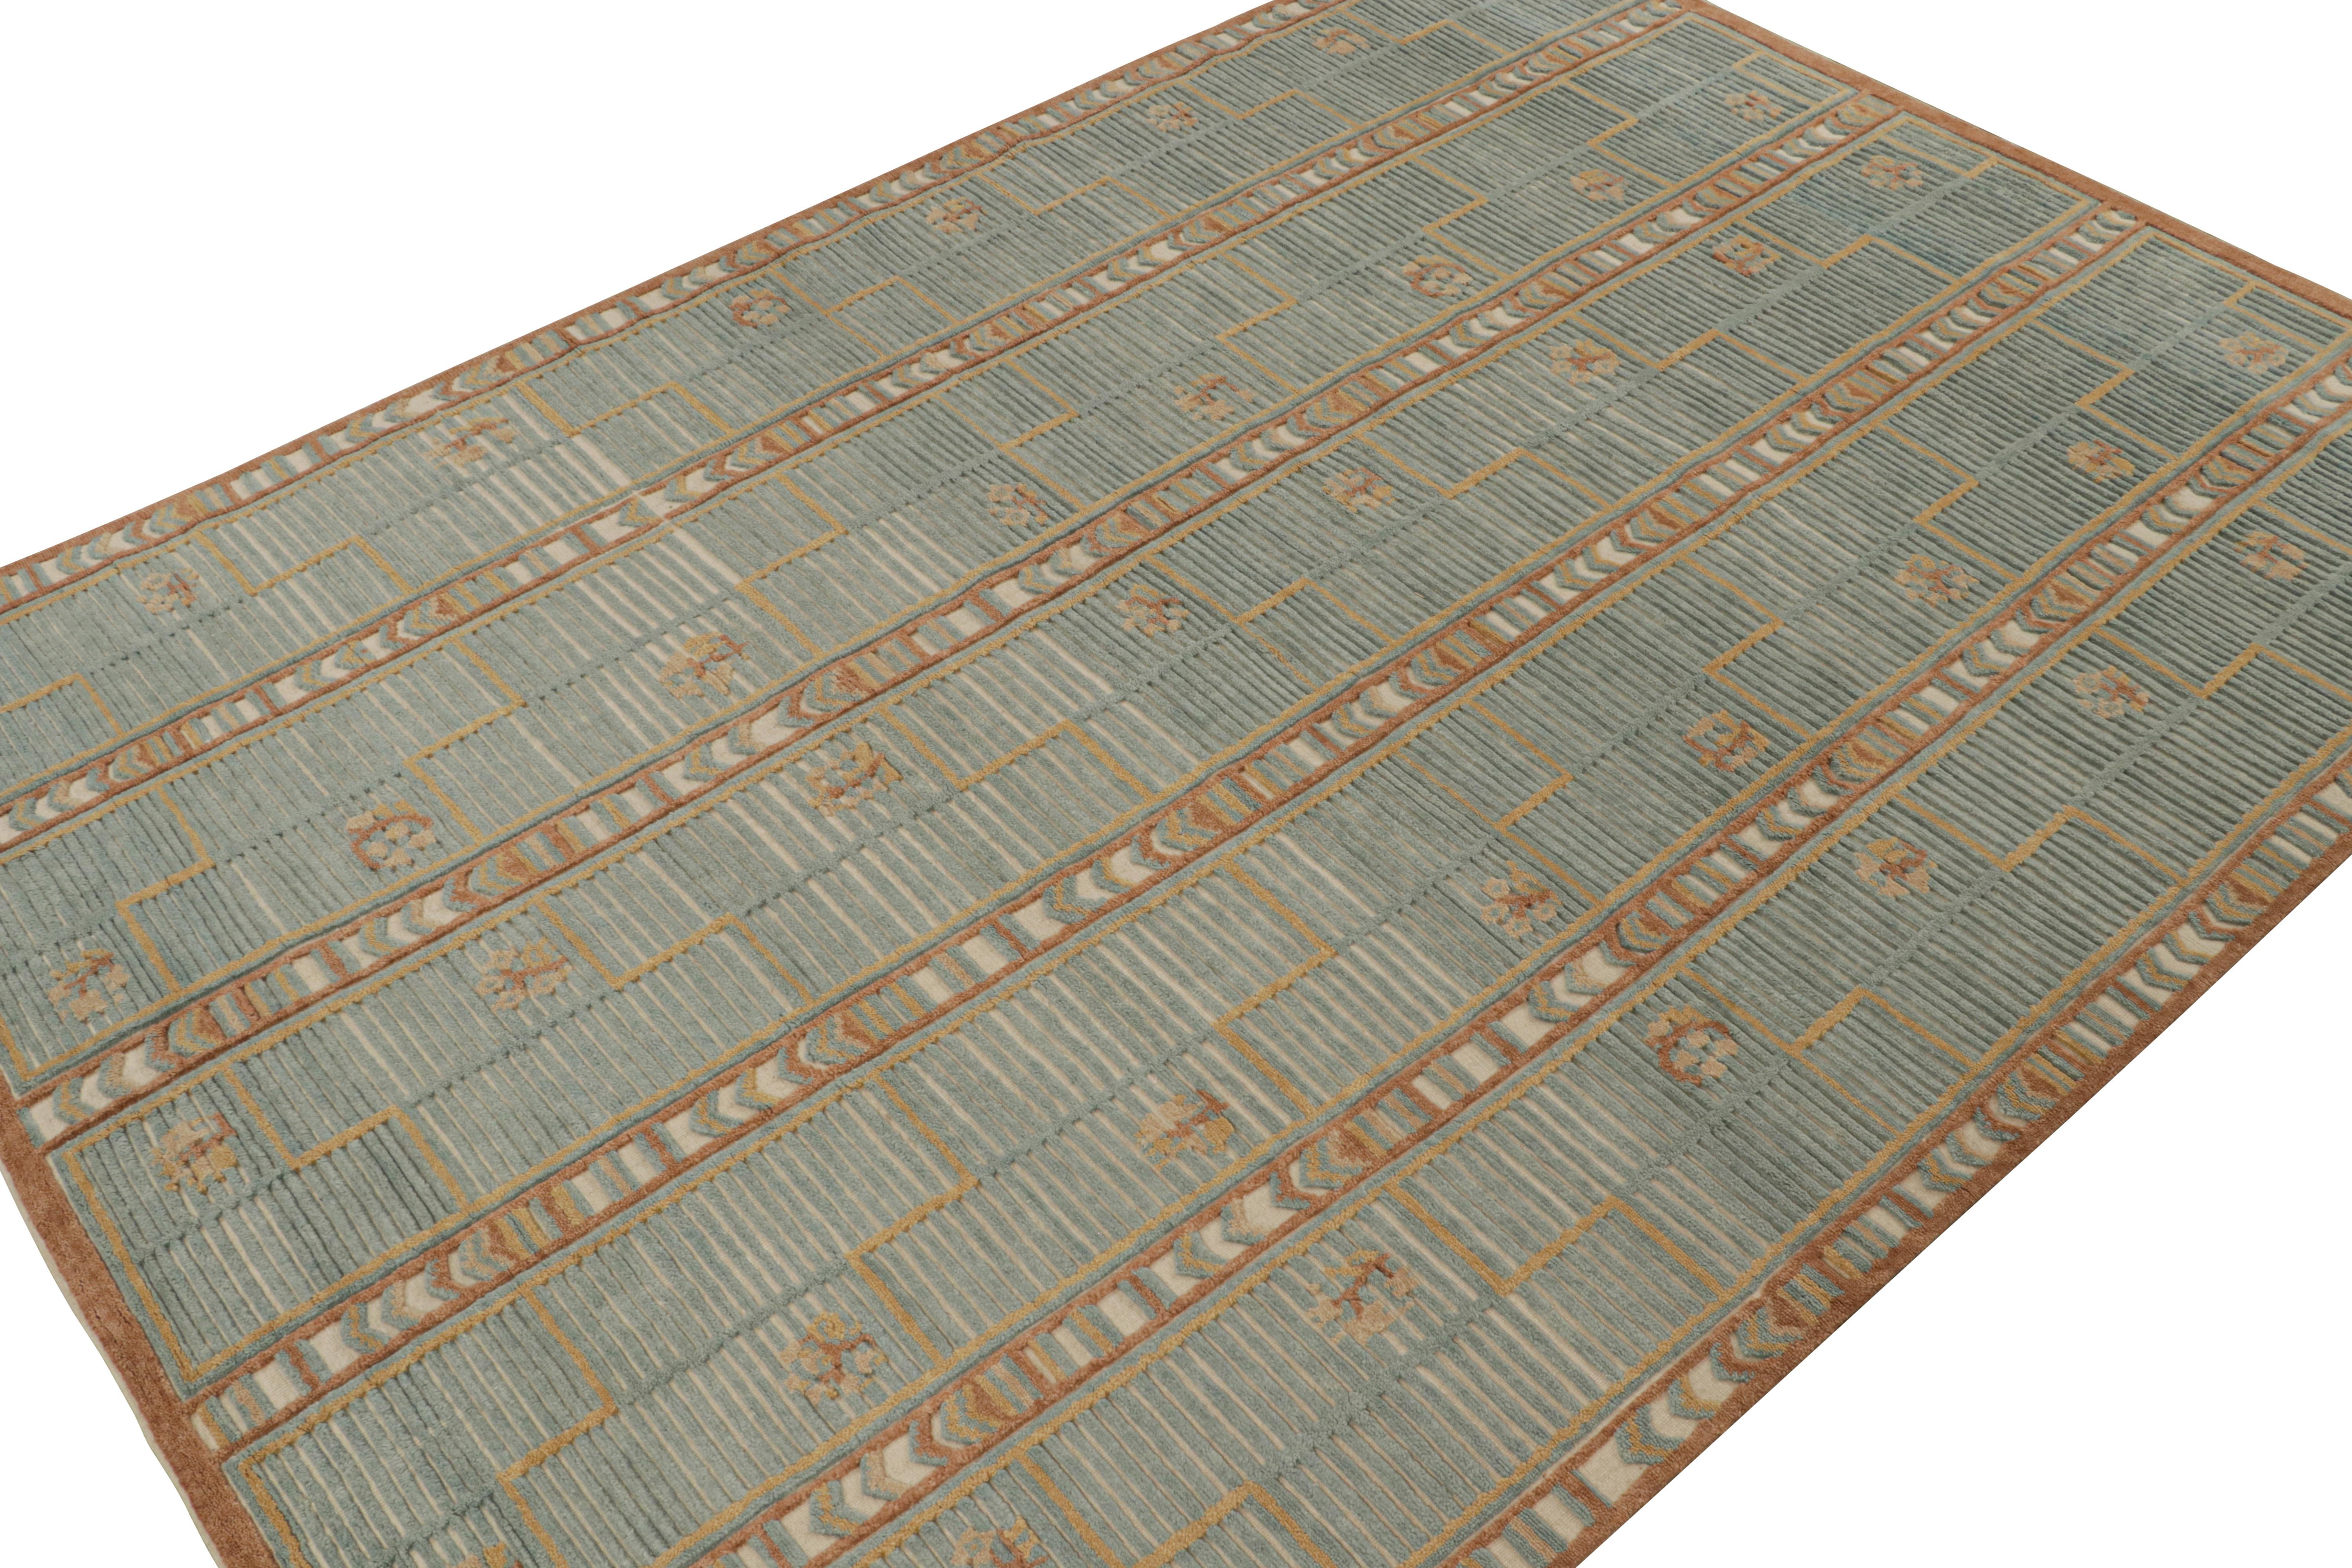 Indian Rug & Kilim’s Scandinavian Style Rug in Blue, Brown & Gold Geometric Pattern For Sale